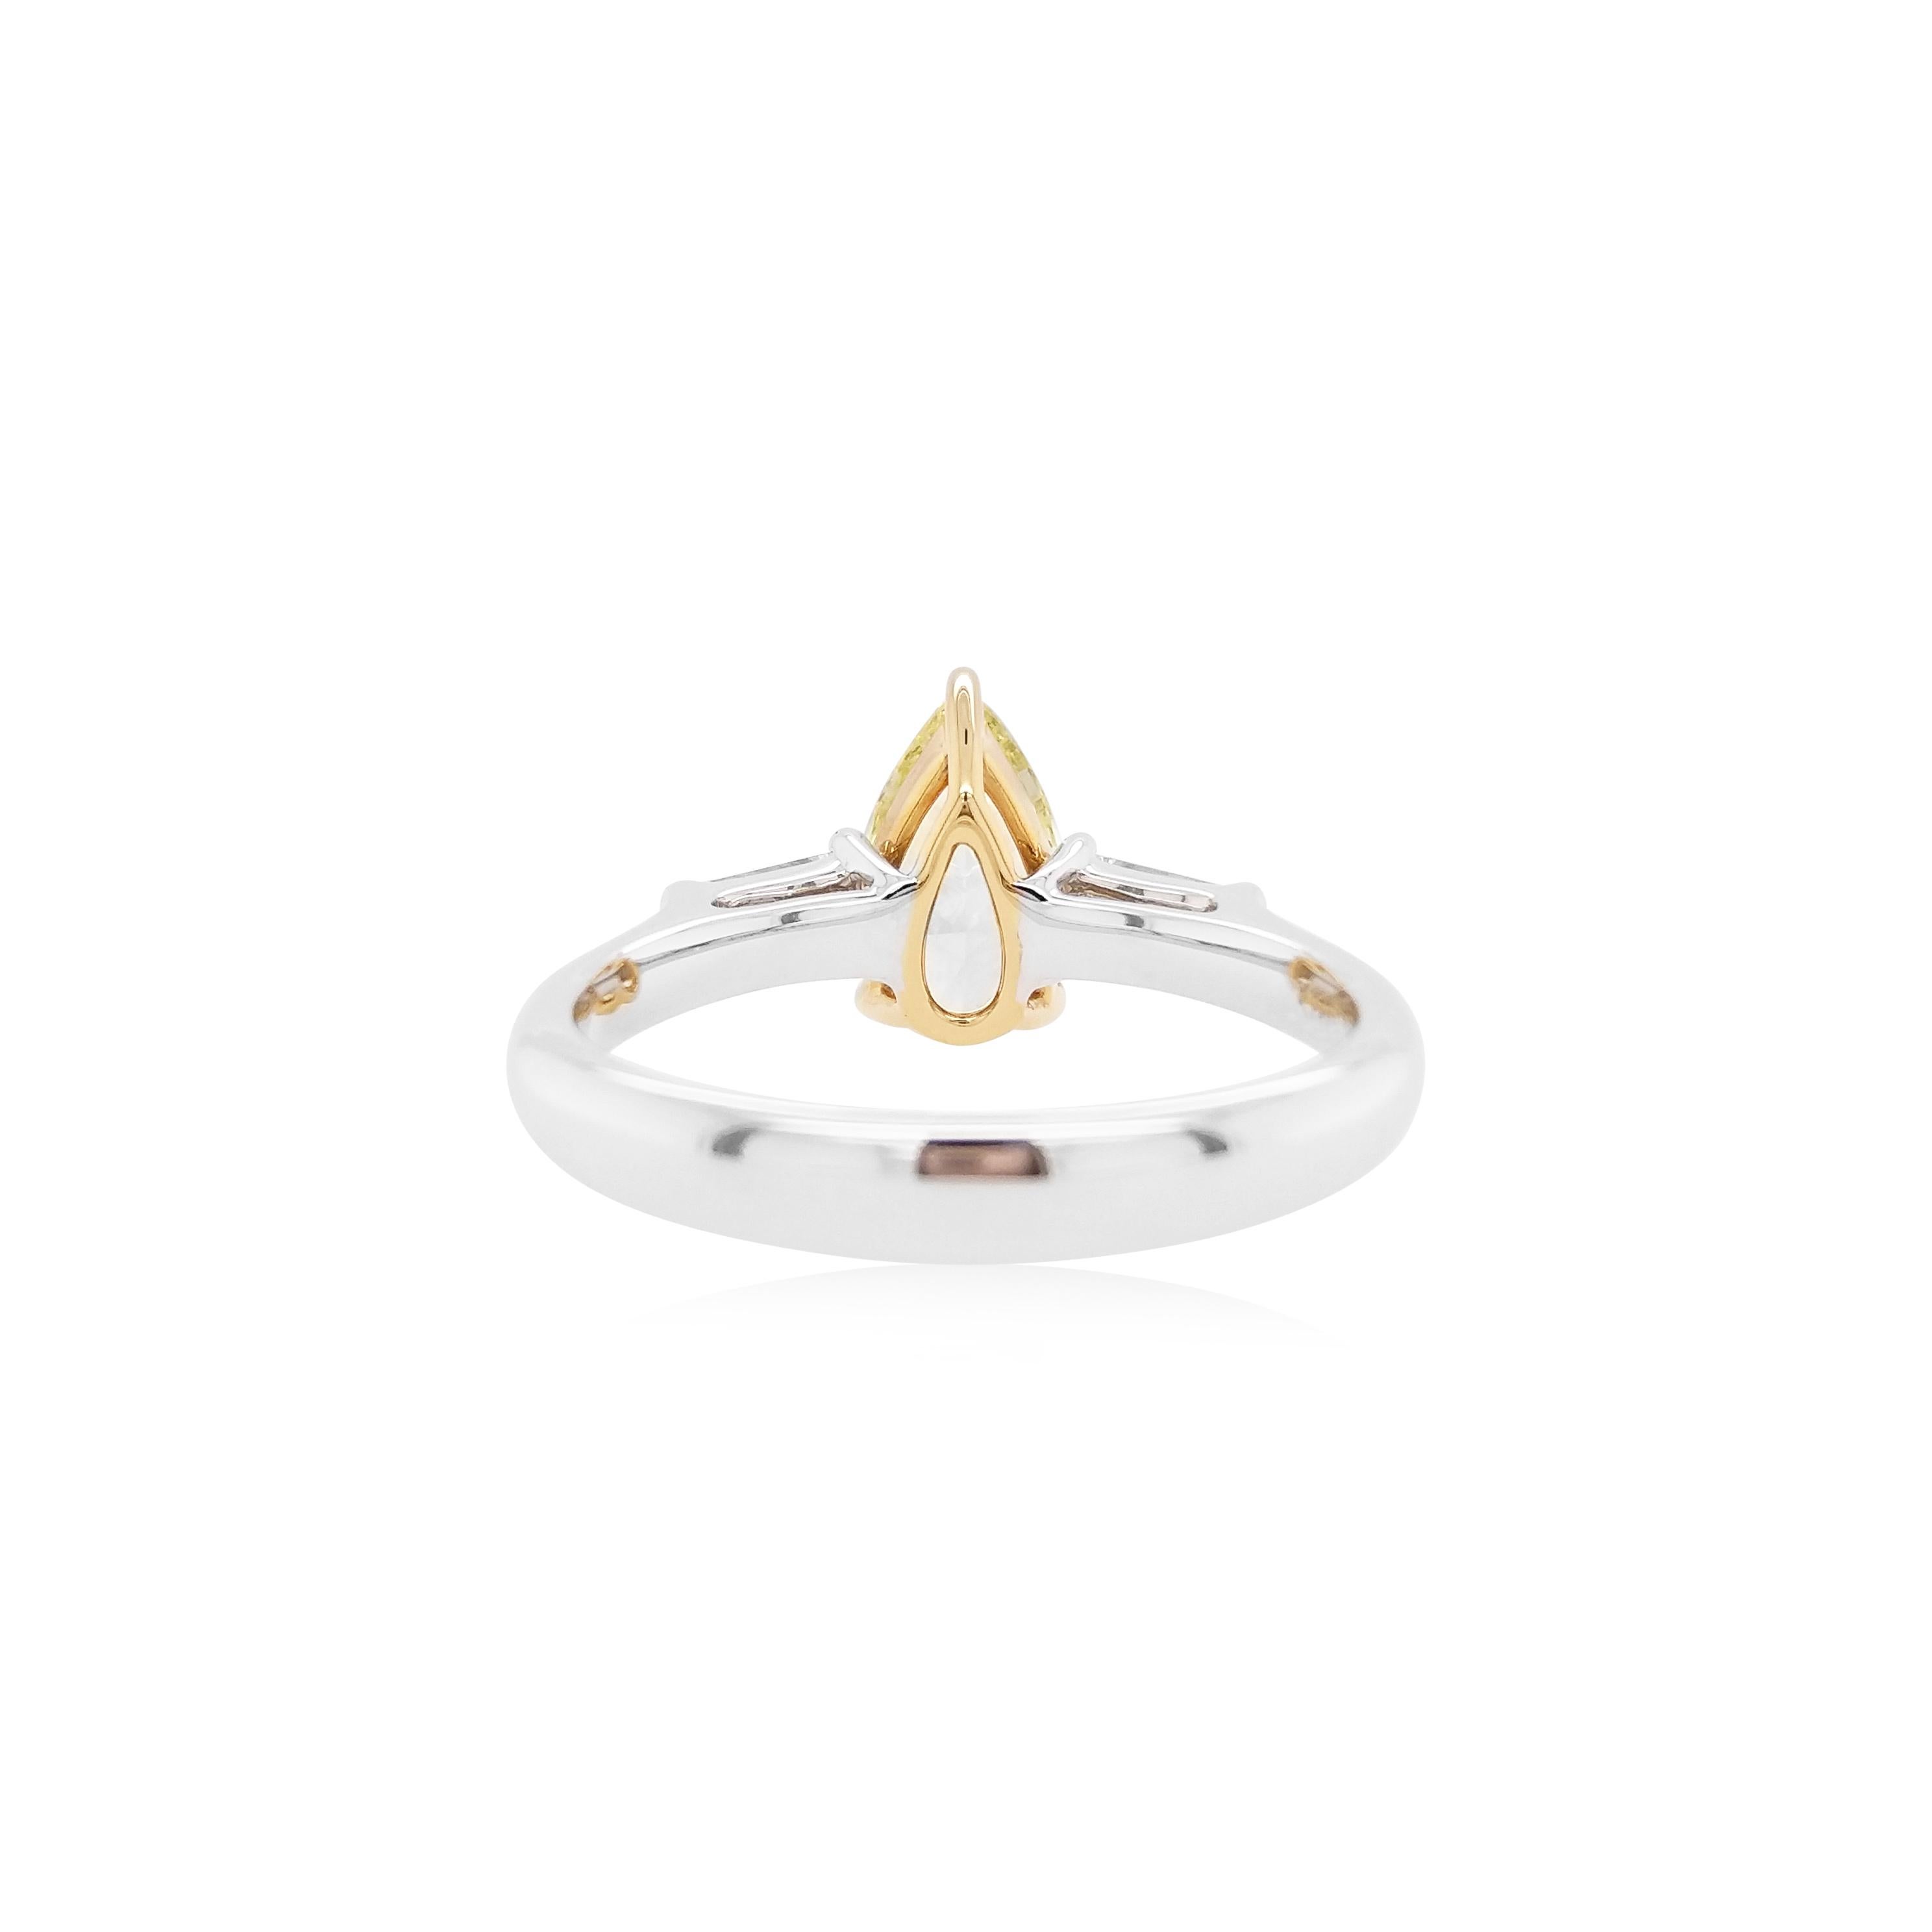 This charming 18K gold ring features a high-quality Pear drop Fancy Yellow Diamond at the centre, each side set with a tapered baguette White Diamonds. Unique and striking, this exceptional ring will add a touch of high glamour to any look.
-	Centre